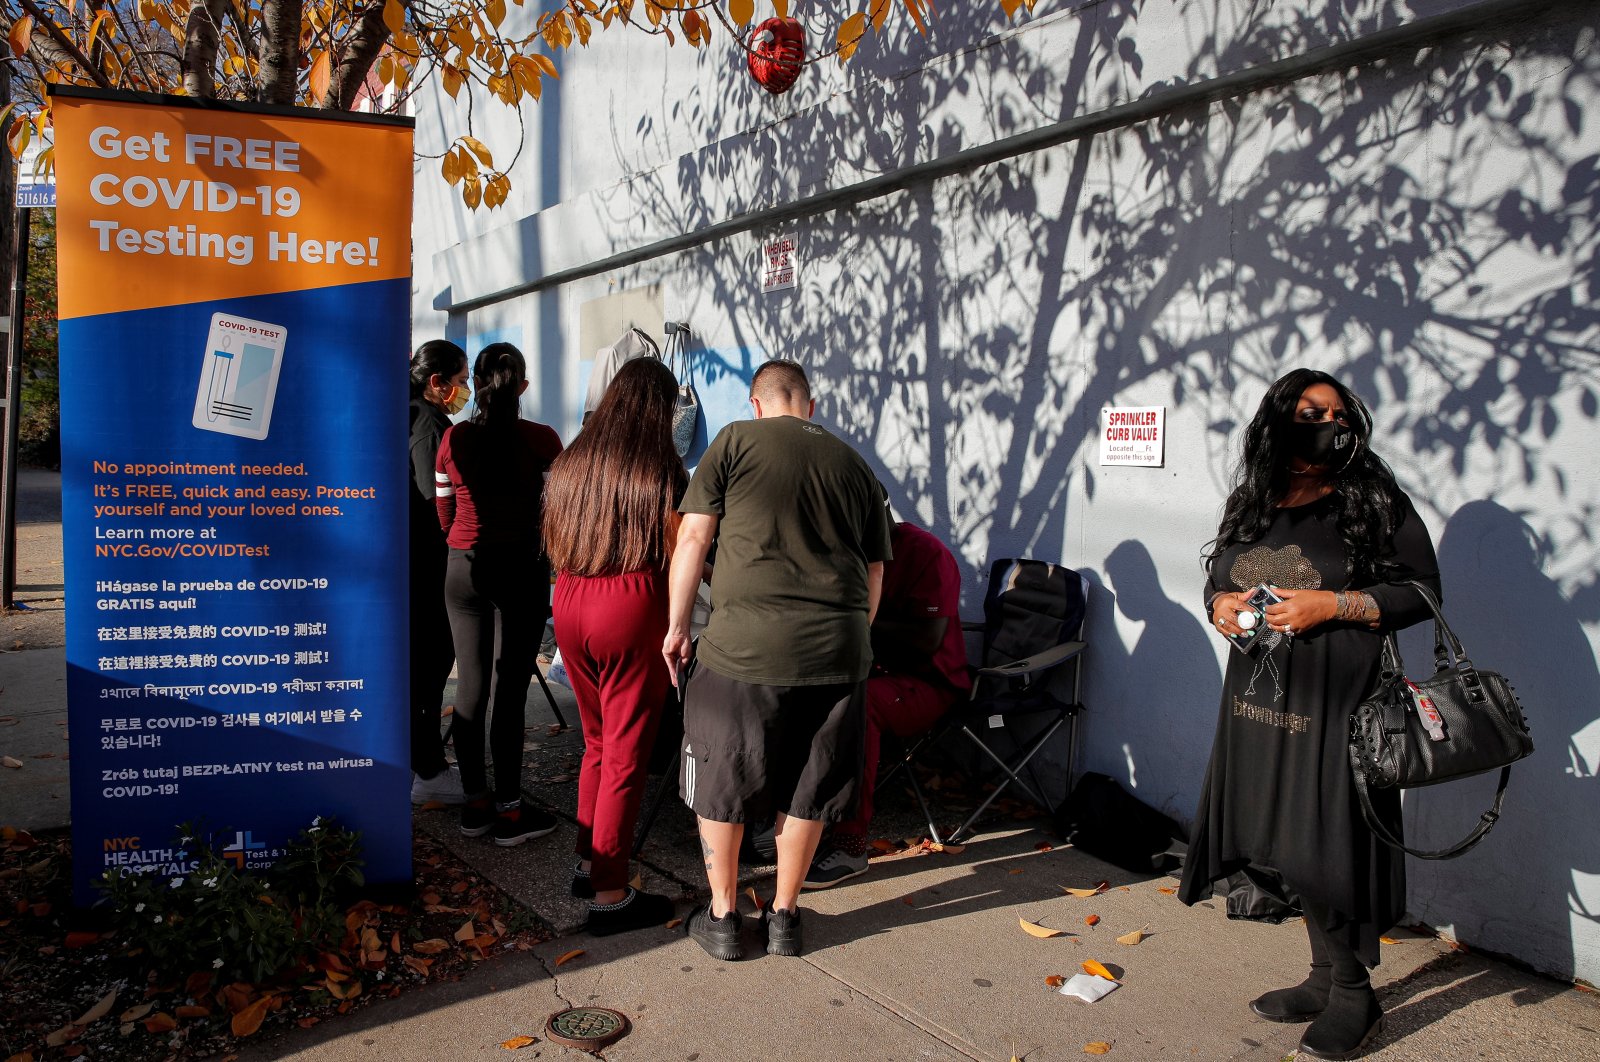 People stand in line to be tested for COVID-19 in Staten Island, New York, U.S., Nov. 10, 2020. (REUTERS Photo)